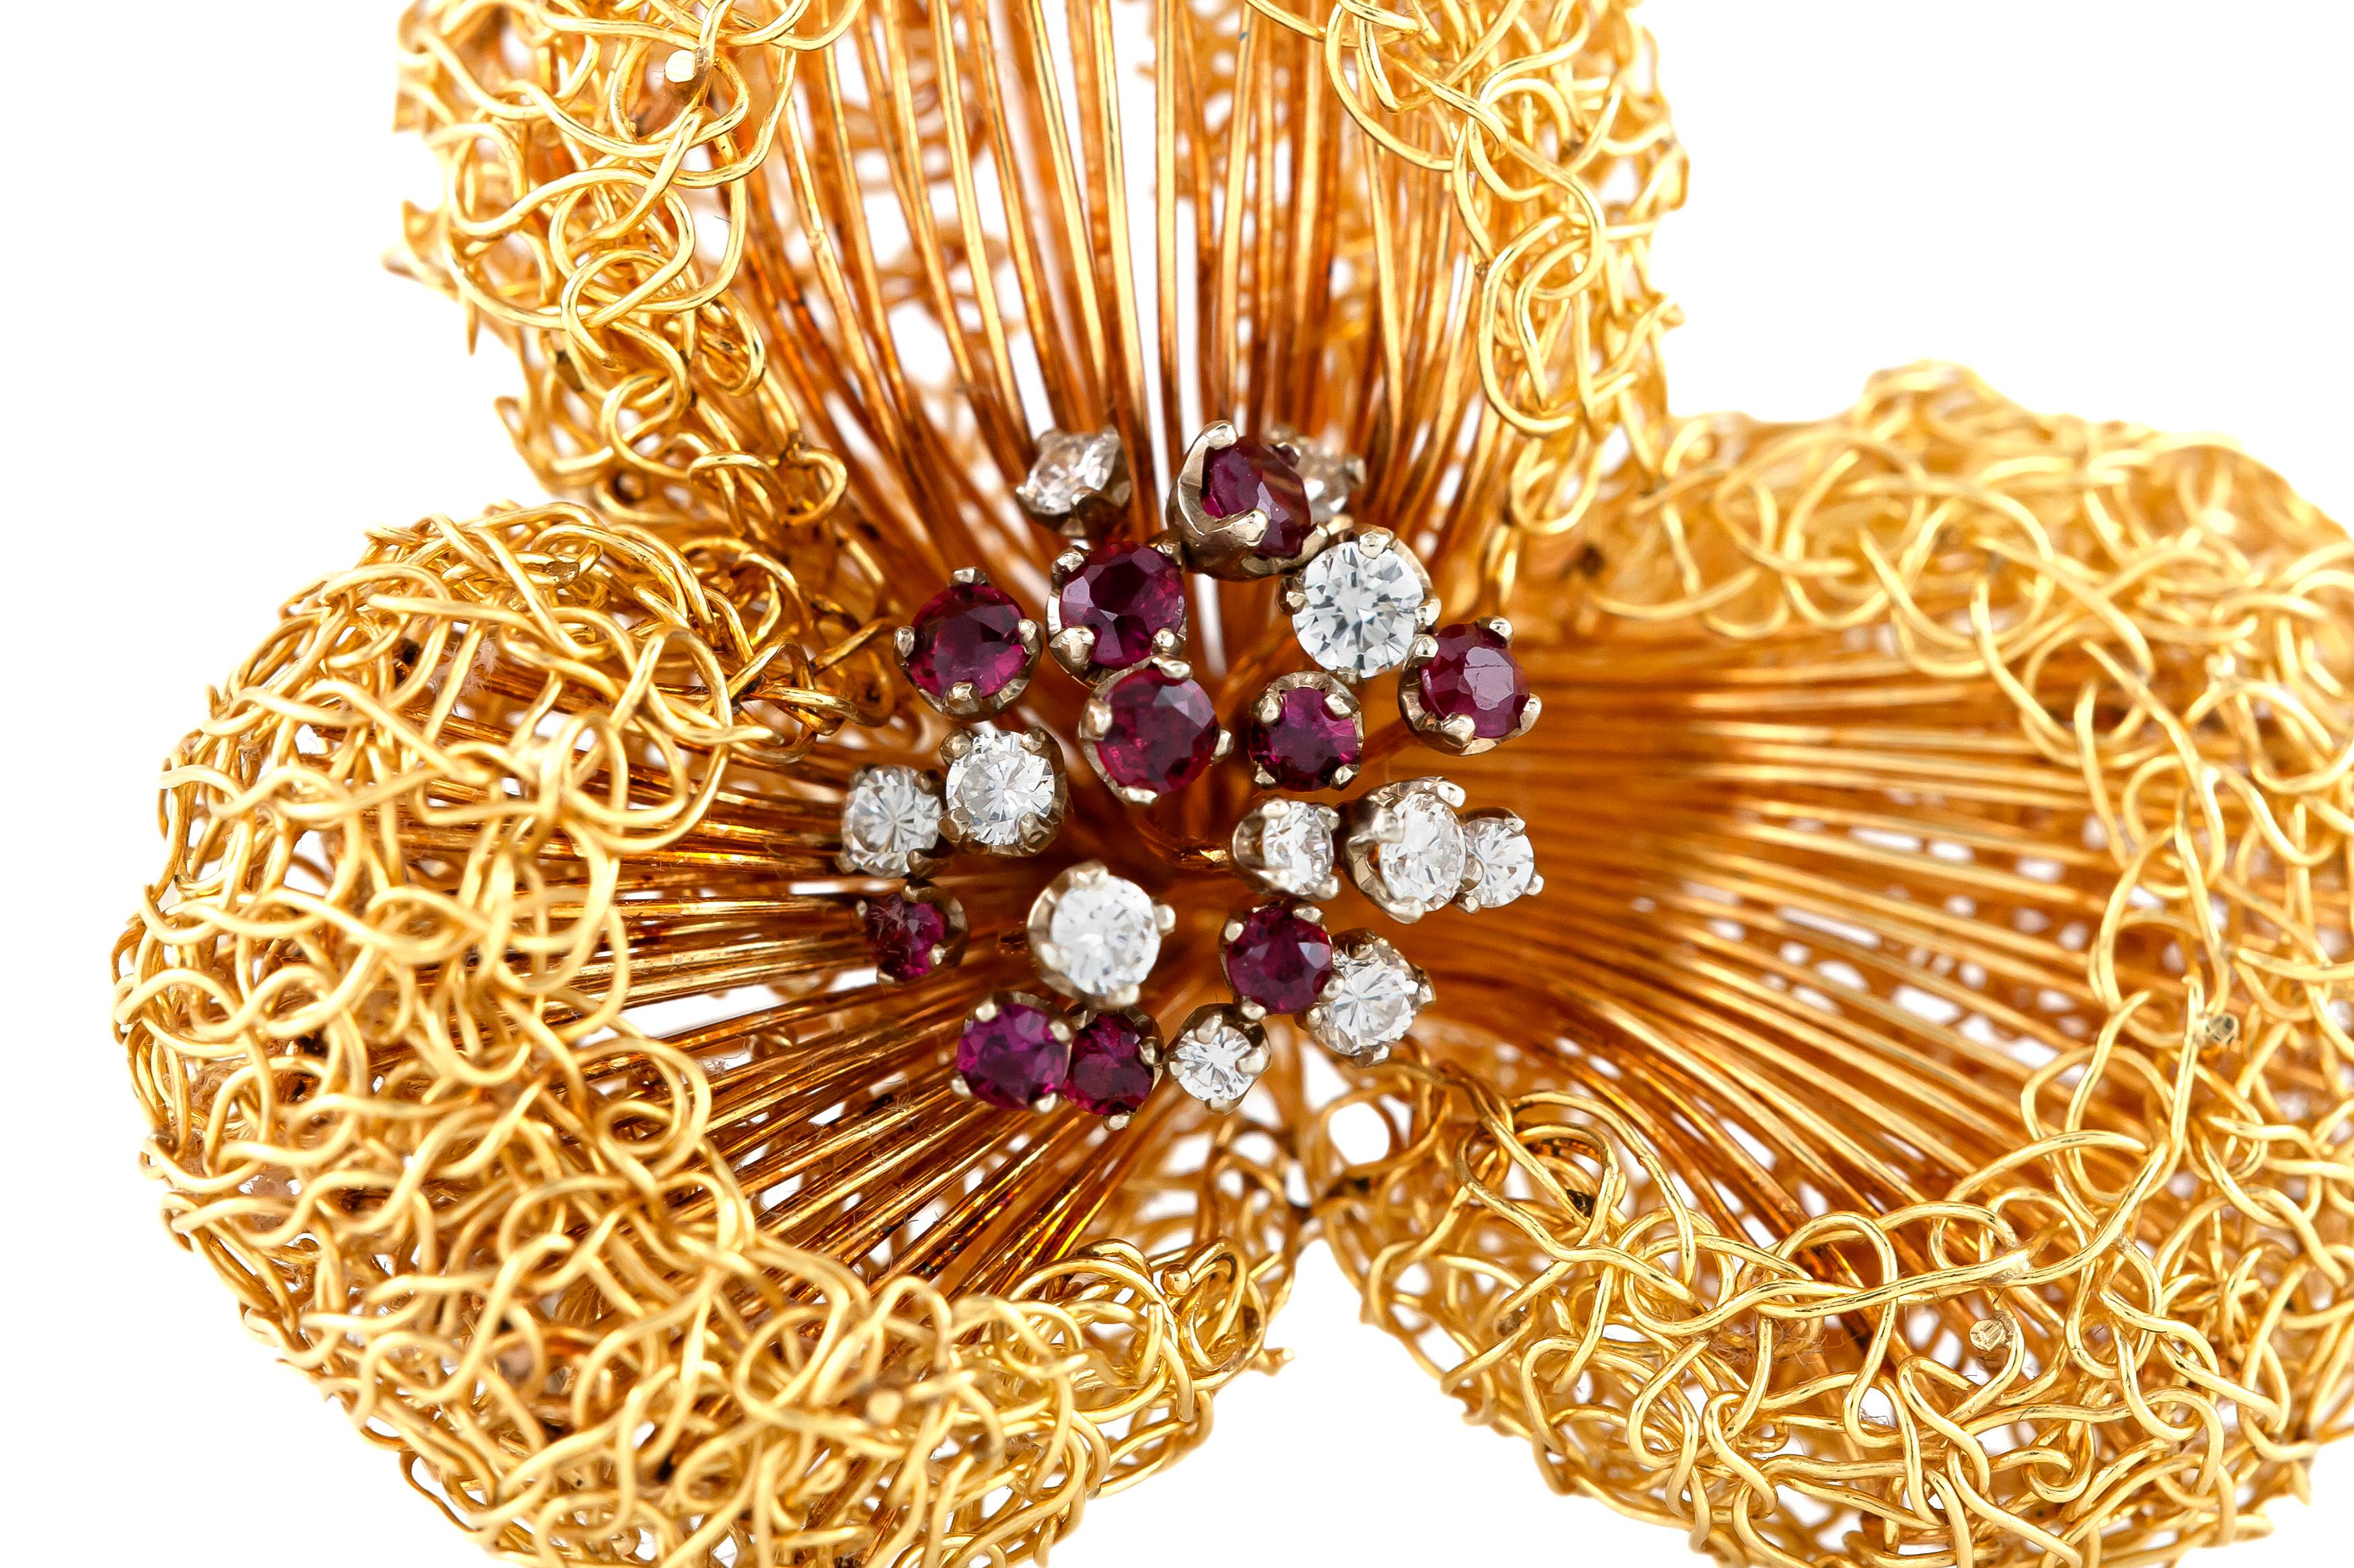 The brooch is finely crafted in 18k yellow gold with rubies weighing approximately total of 0.65, diamonds weighing approximately total of 0.60 carat and the total weight of the brooch is 31.4 dwt.